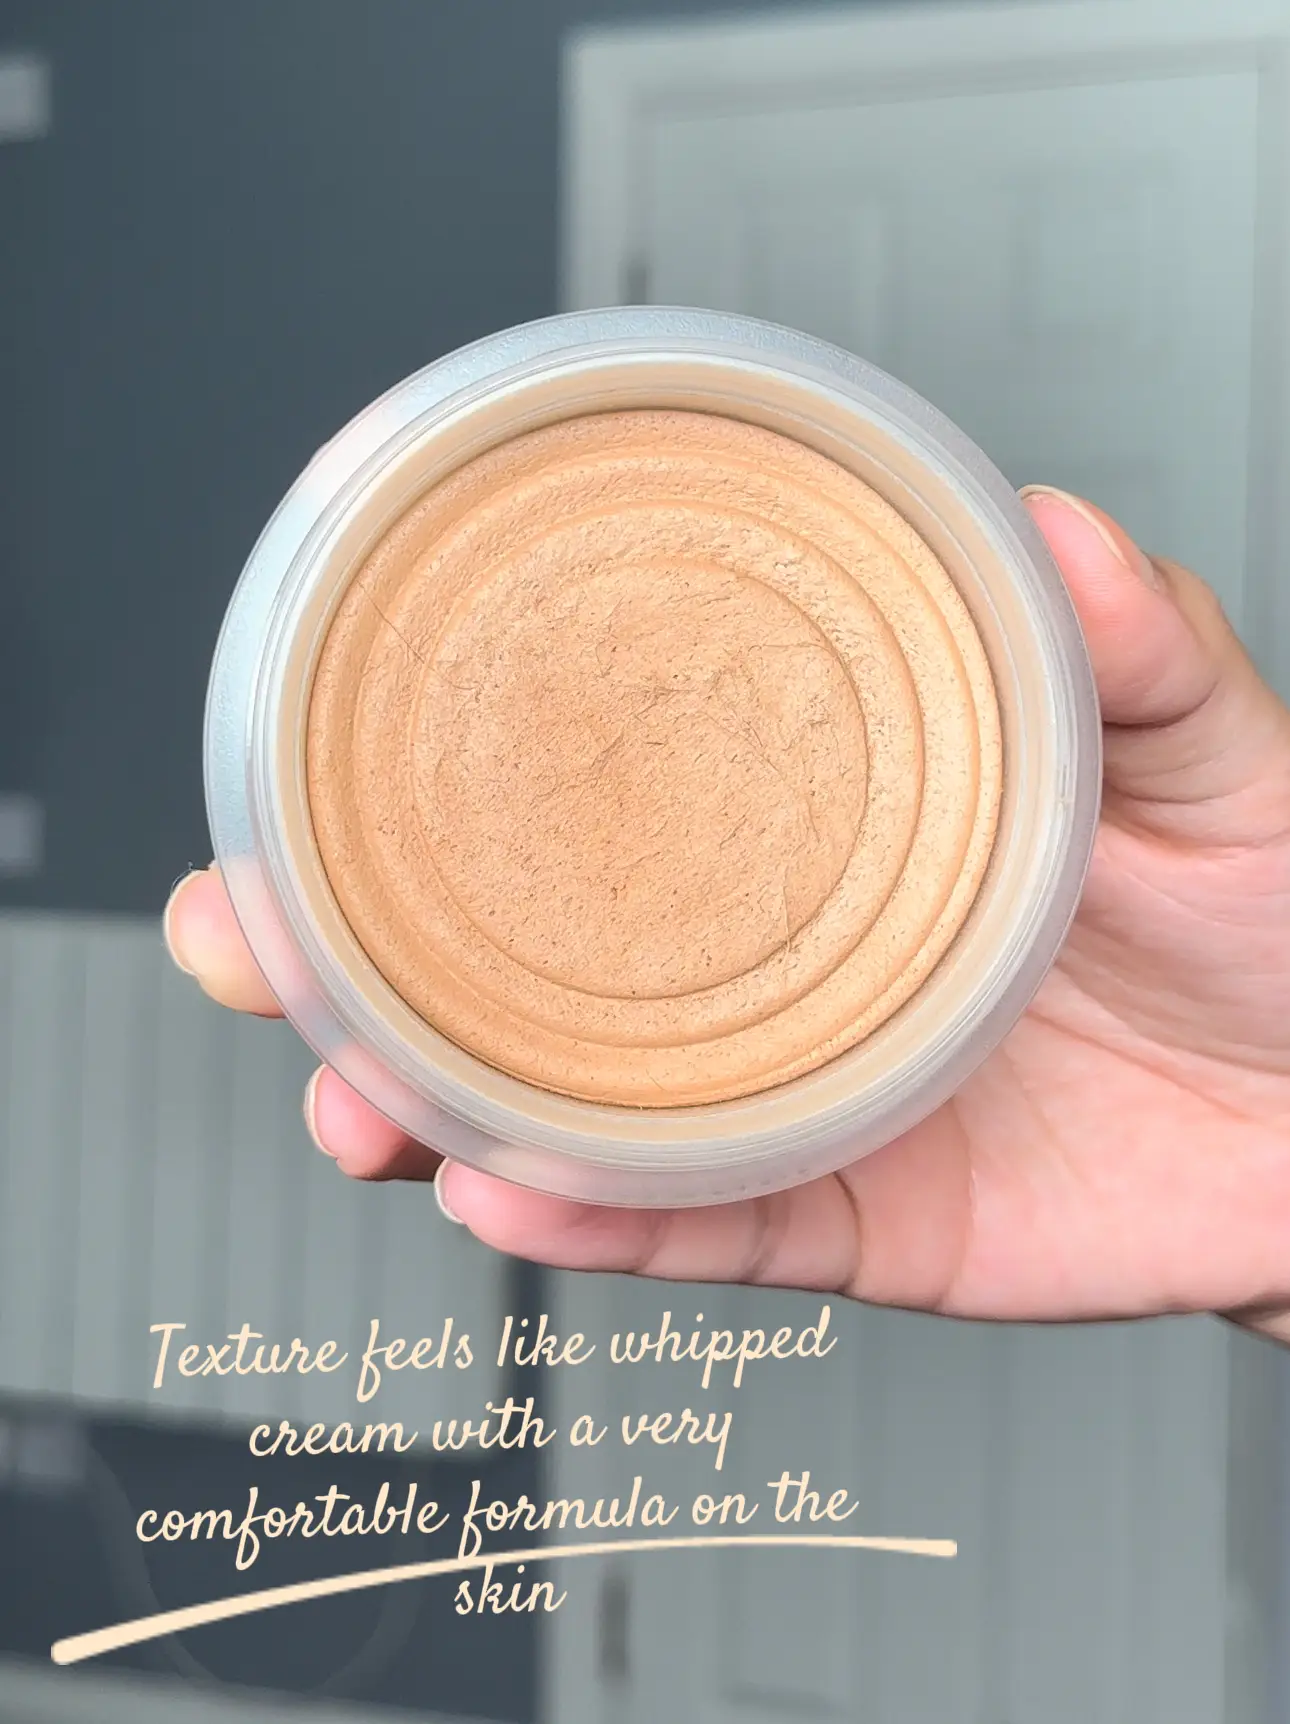 Chanel Les Beiges Bronzing Cream, Gallery posted by Saba.ali32